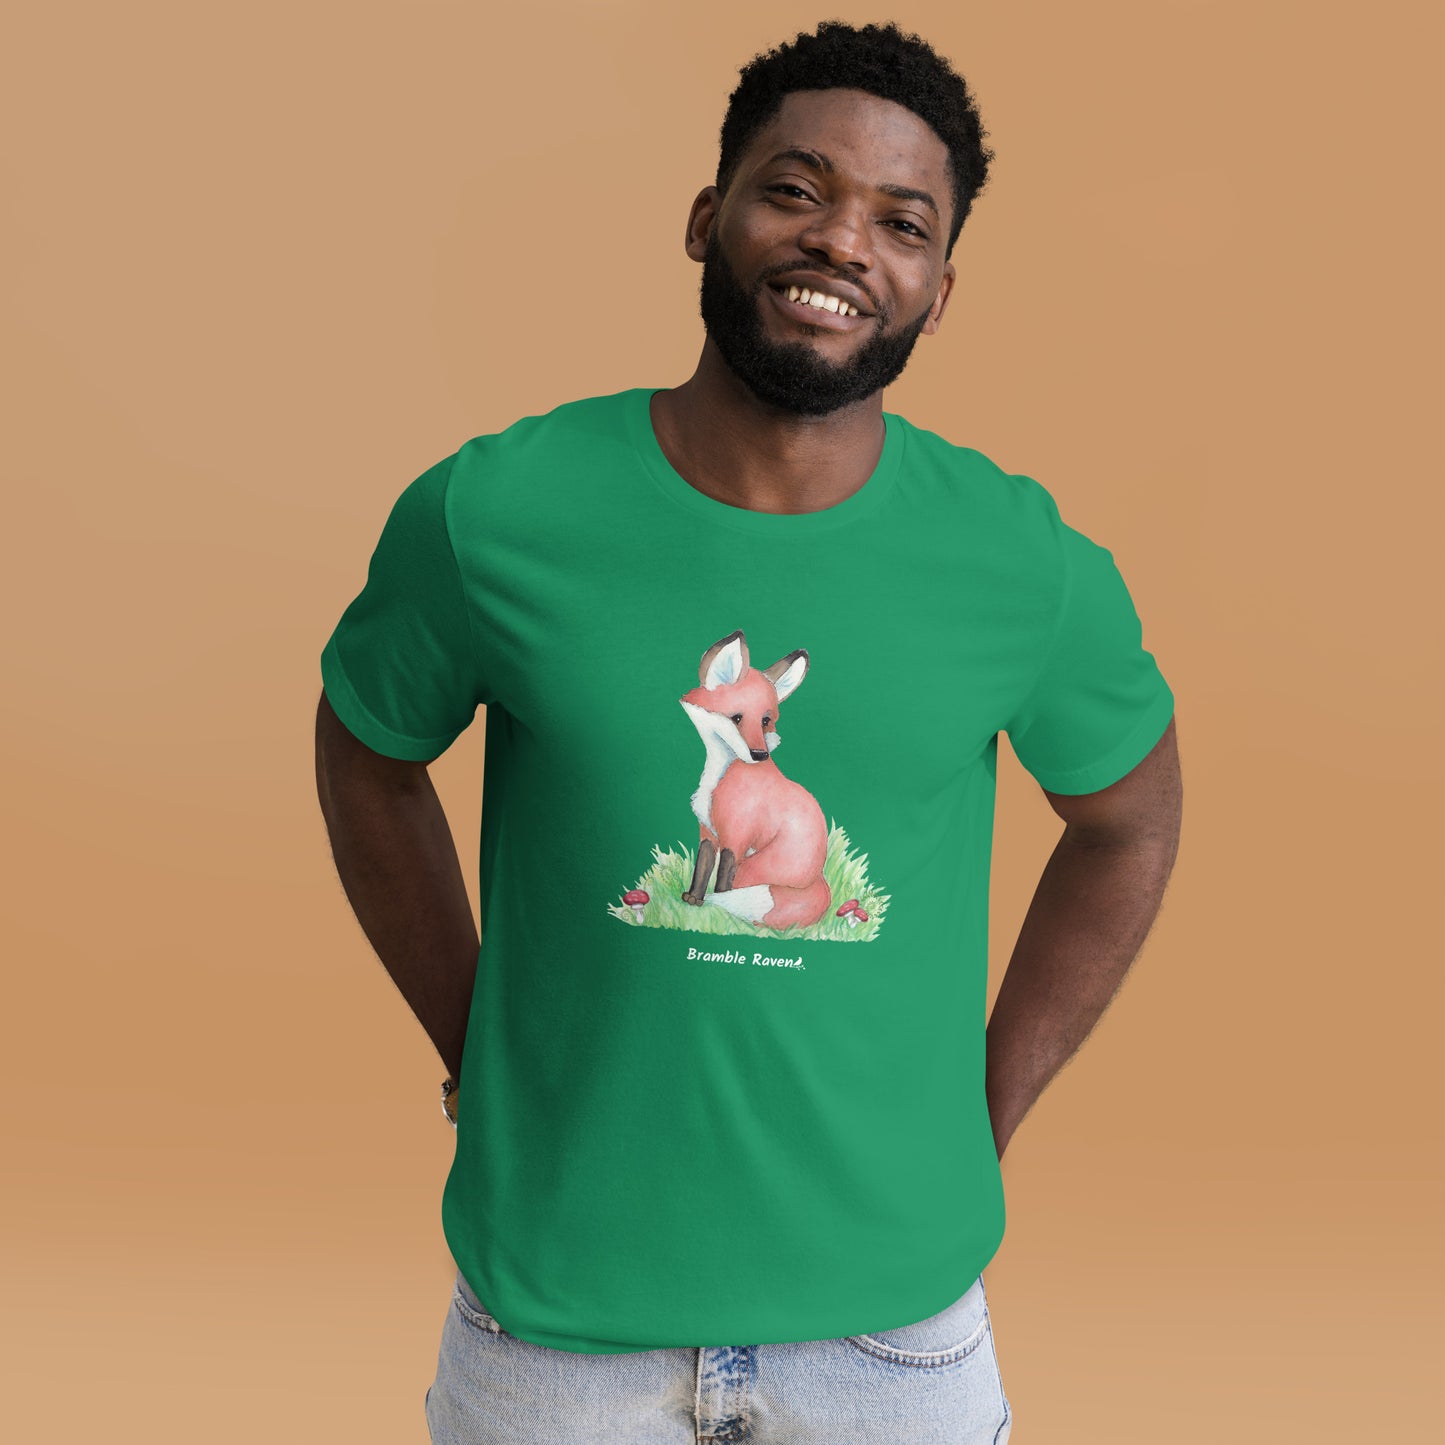 Unisex kelly green colored forest fox t-shirt. Features watercolor print of a fox in the grass surrounded by mushrooms and ferns. Shown on male model.